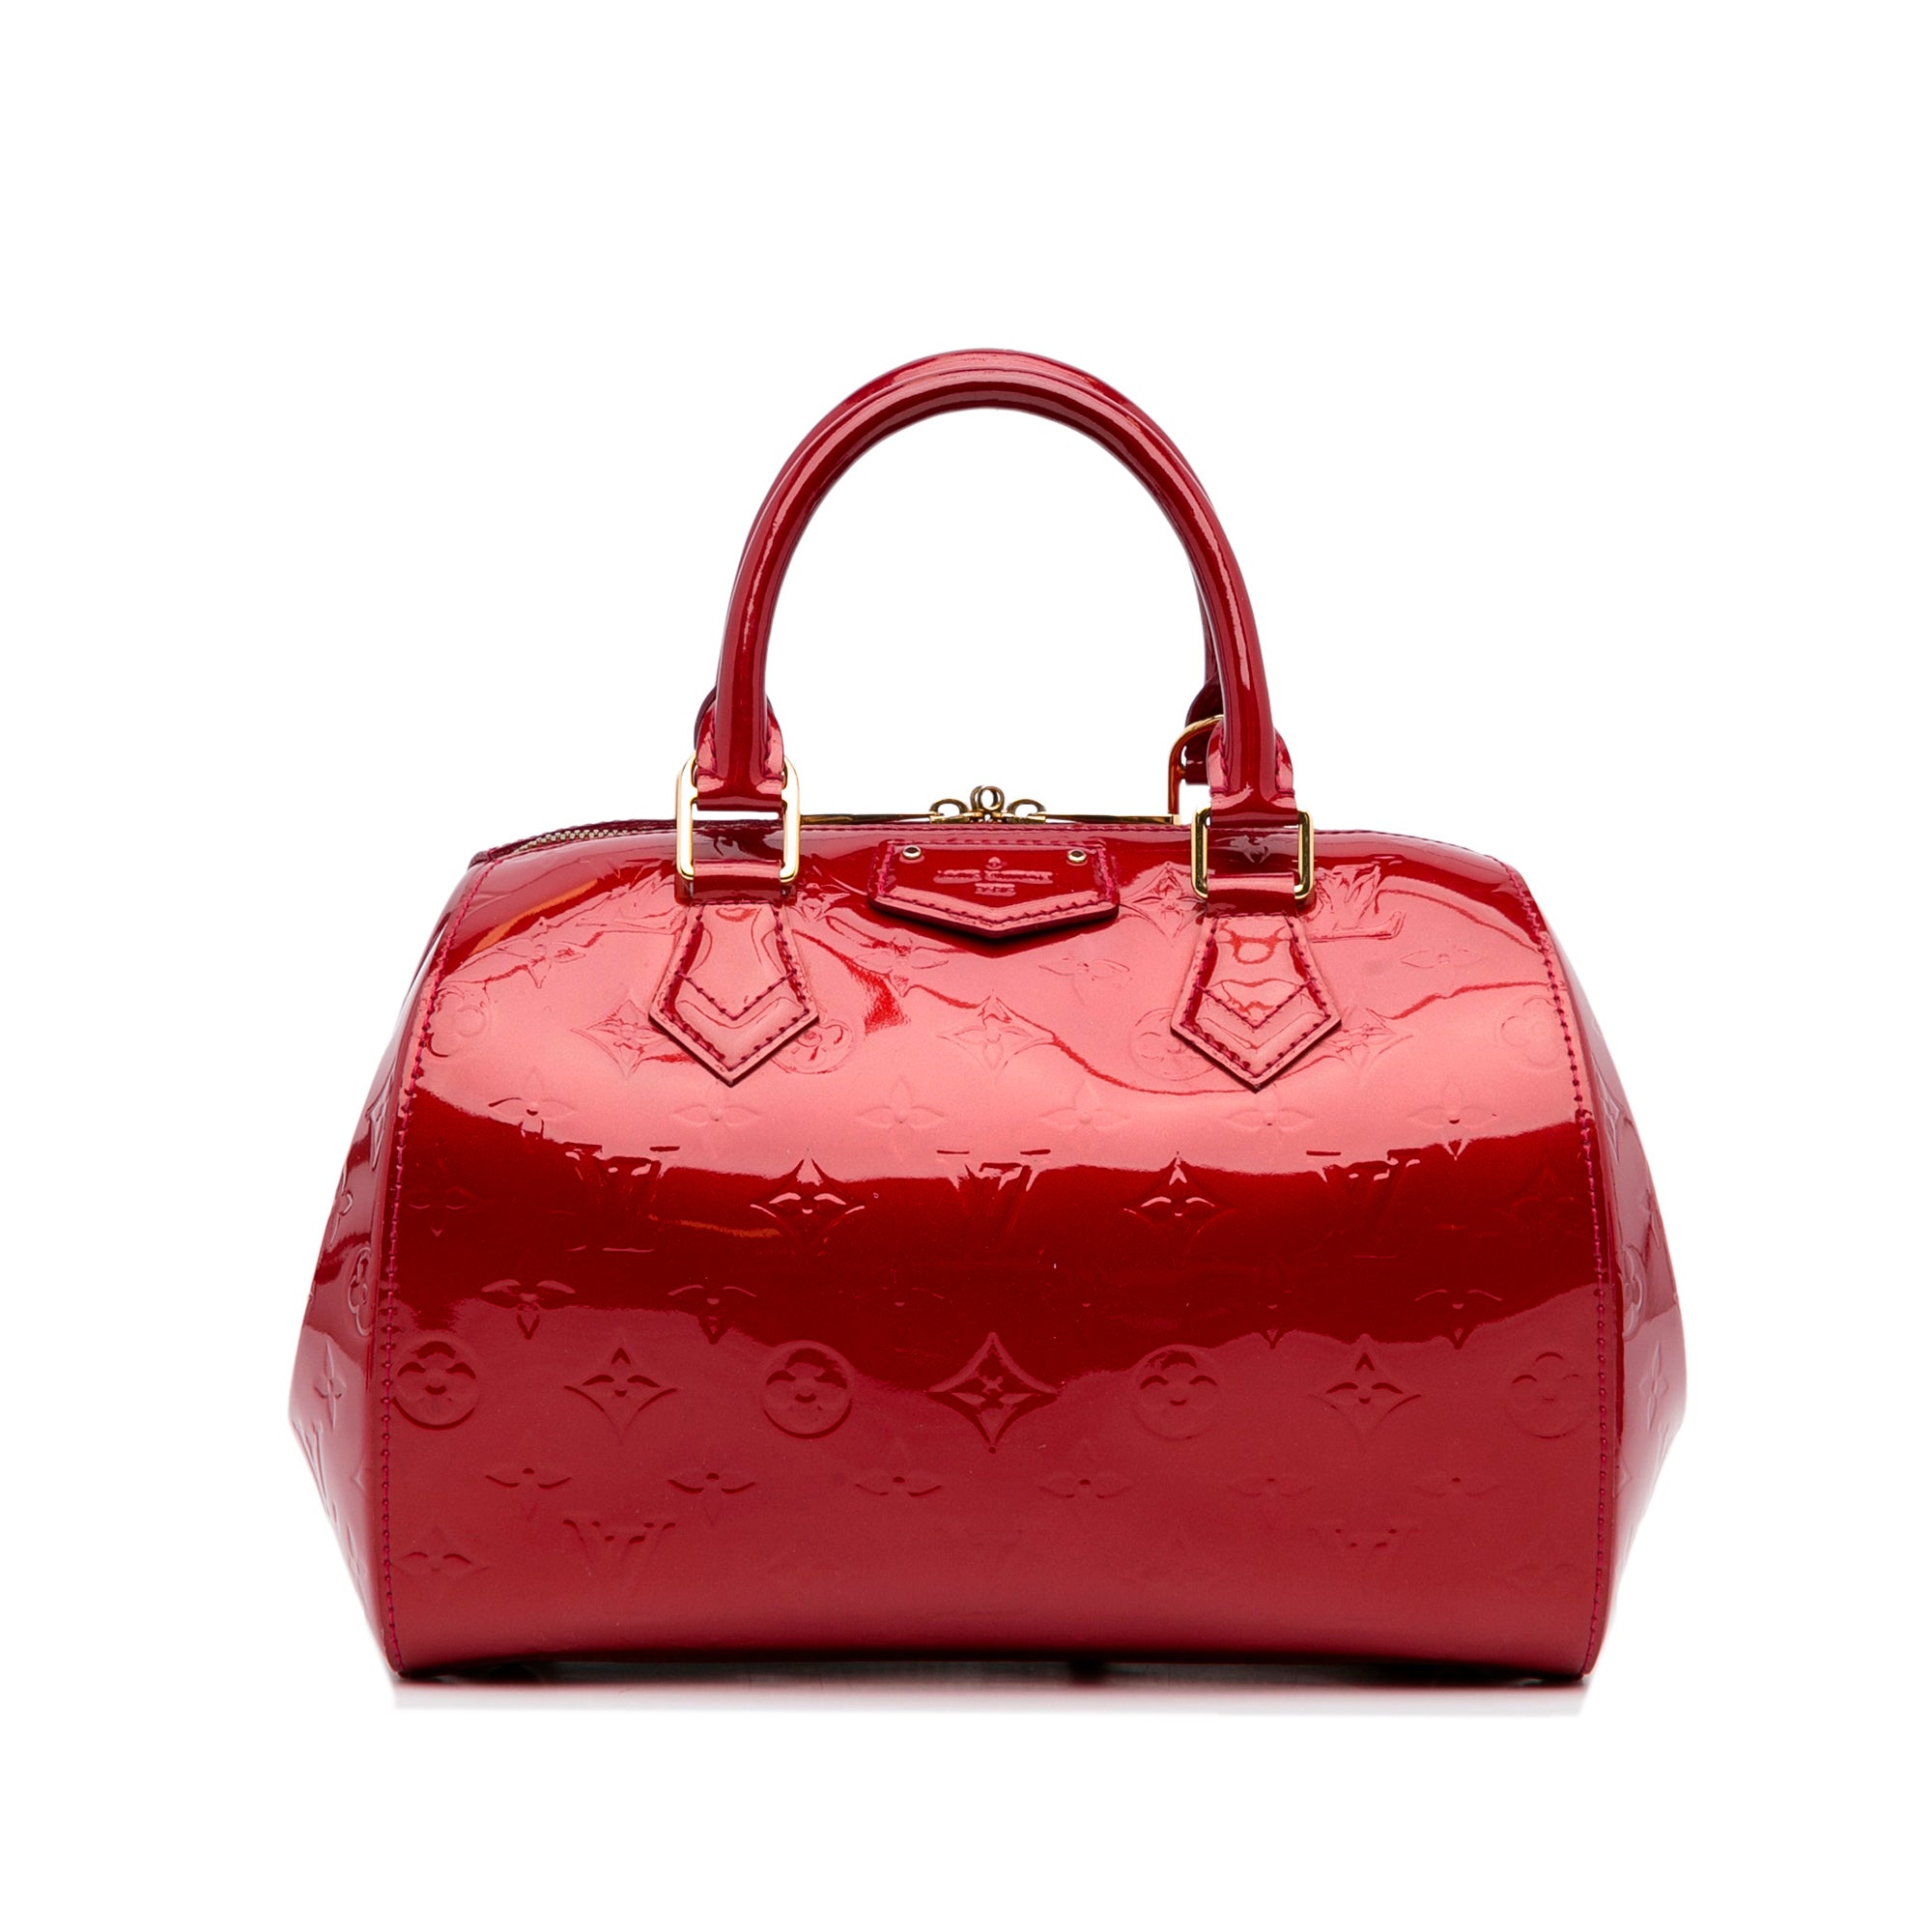 Louis Vuitton - Authenticated Thompson Handbag - Patent Leather Red for Women, Very Good Condition